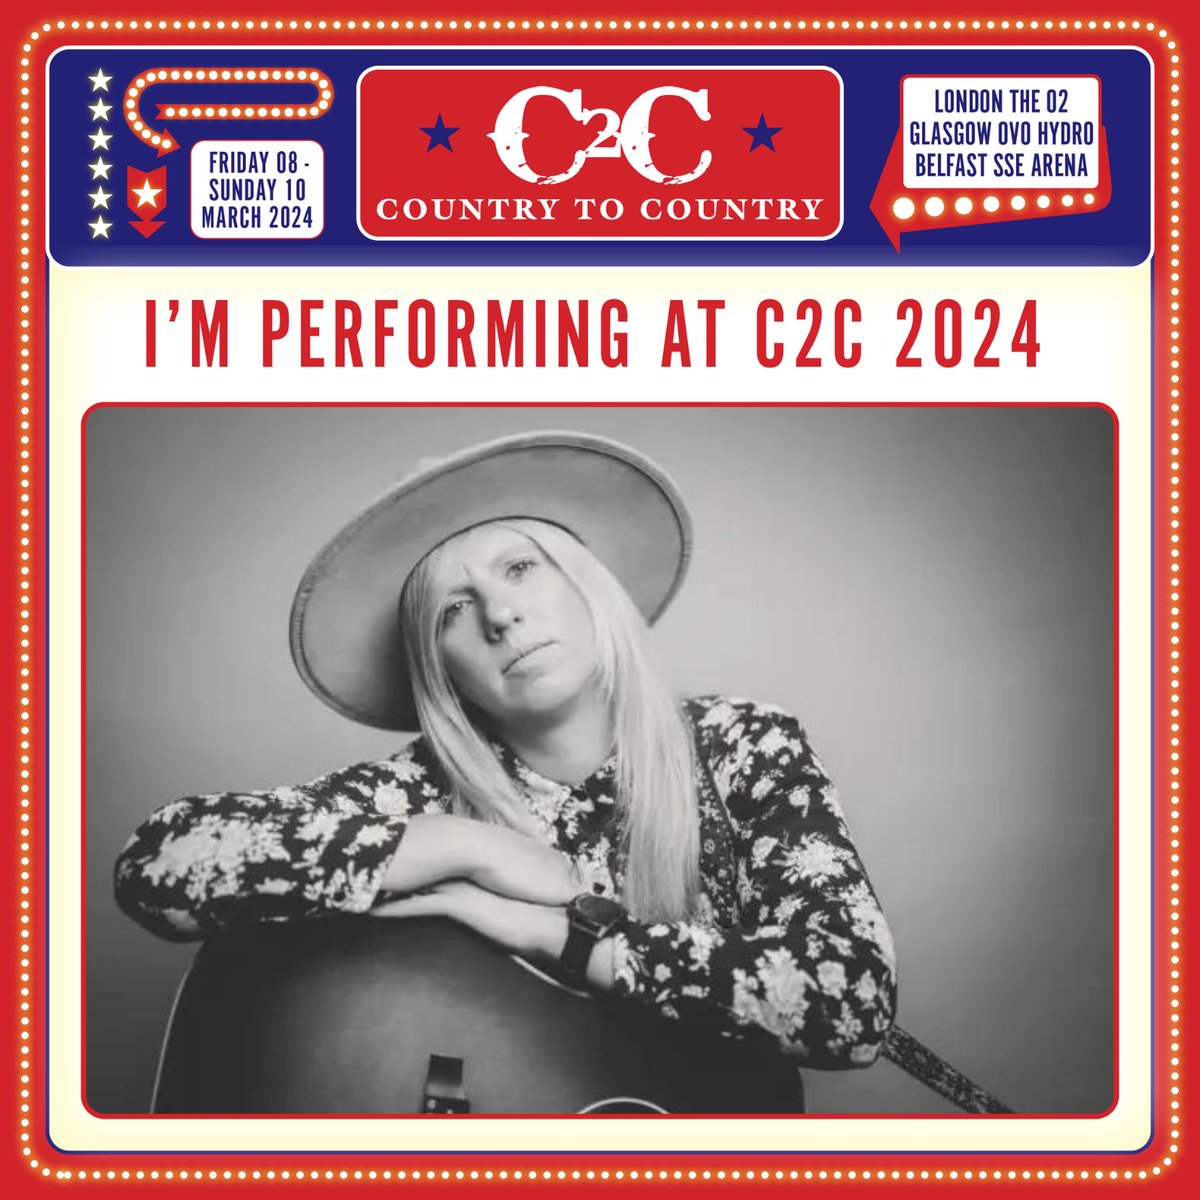 C2C is here! I can’t wait! You can catch me on the Icon Stage Friday 4pm and Saturday 11:30Am Observatory stage! Xx @C2Cfestival London